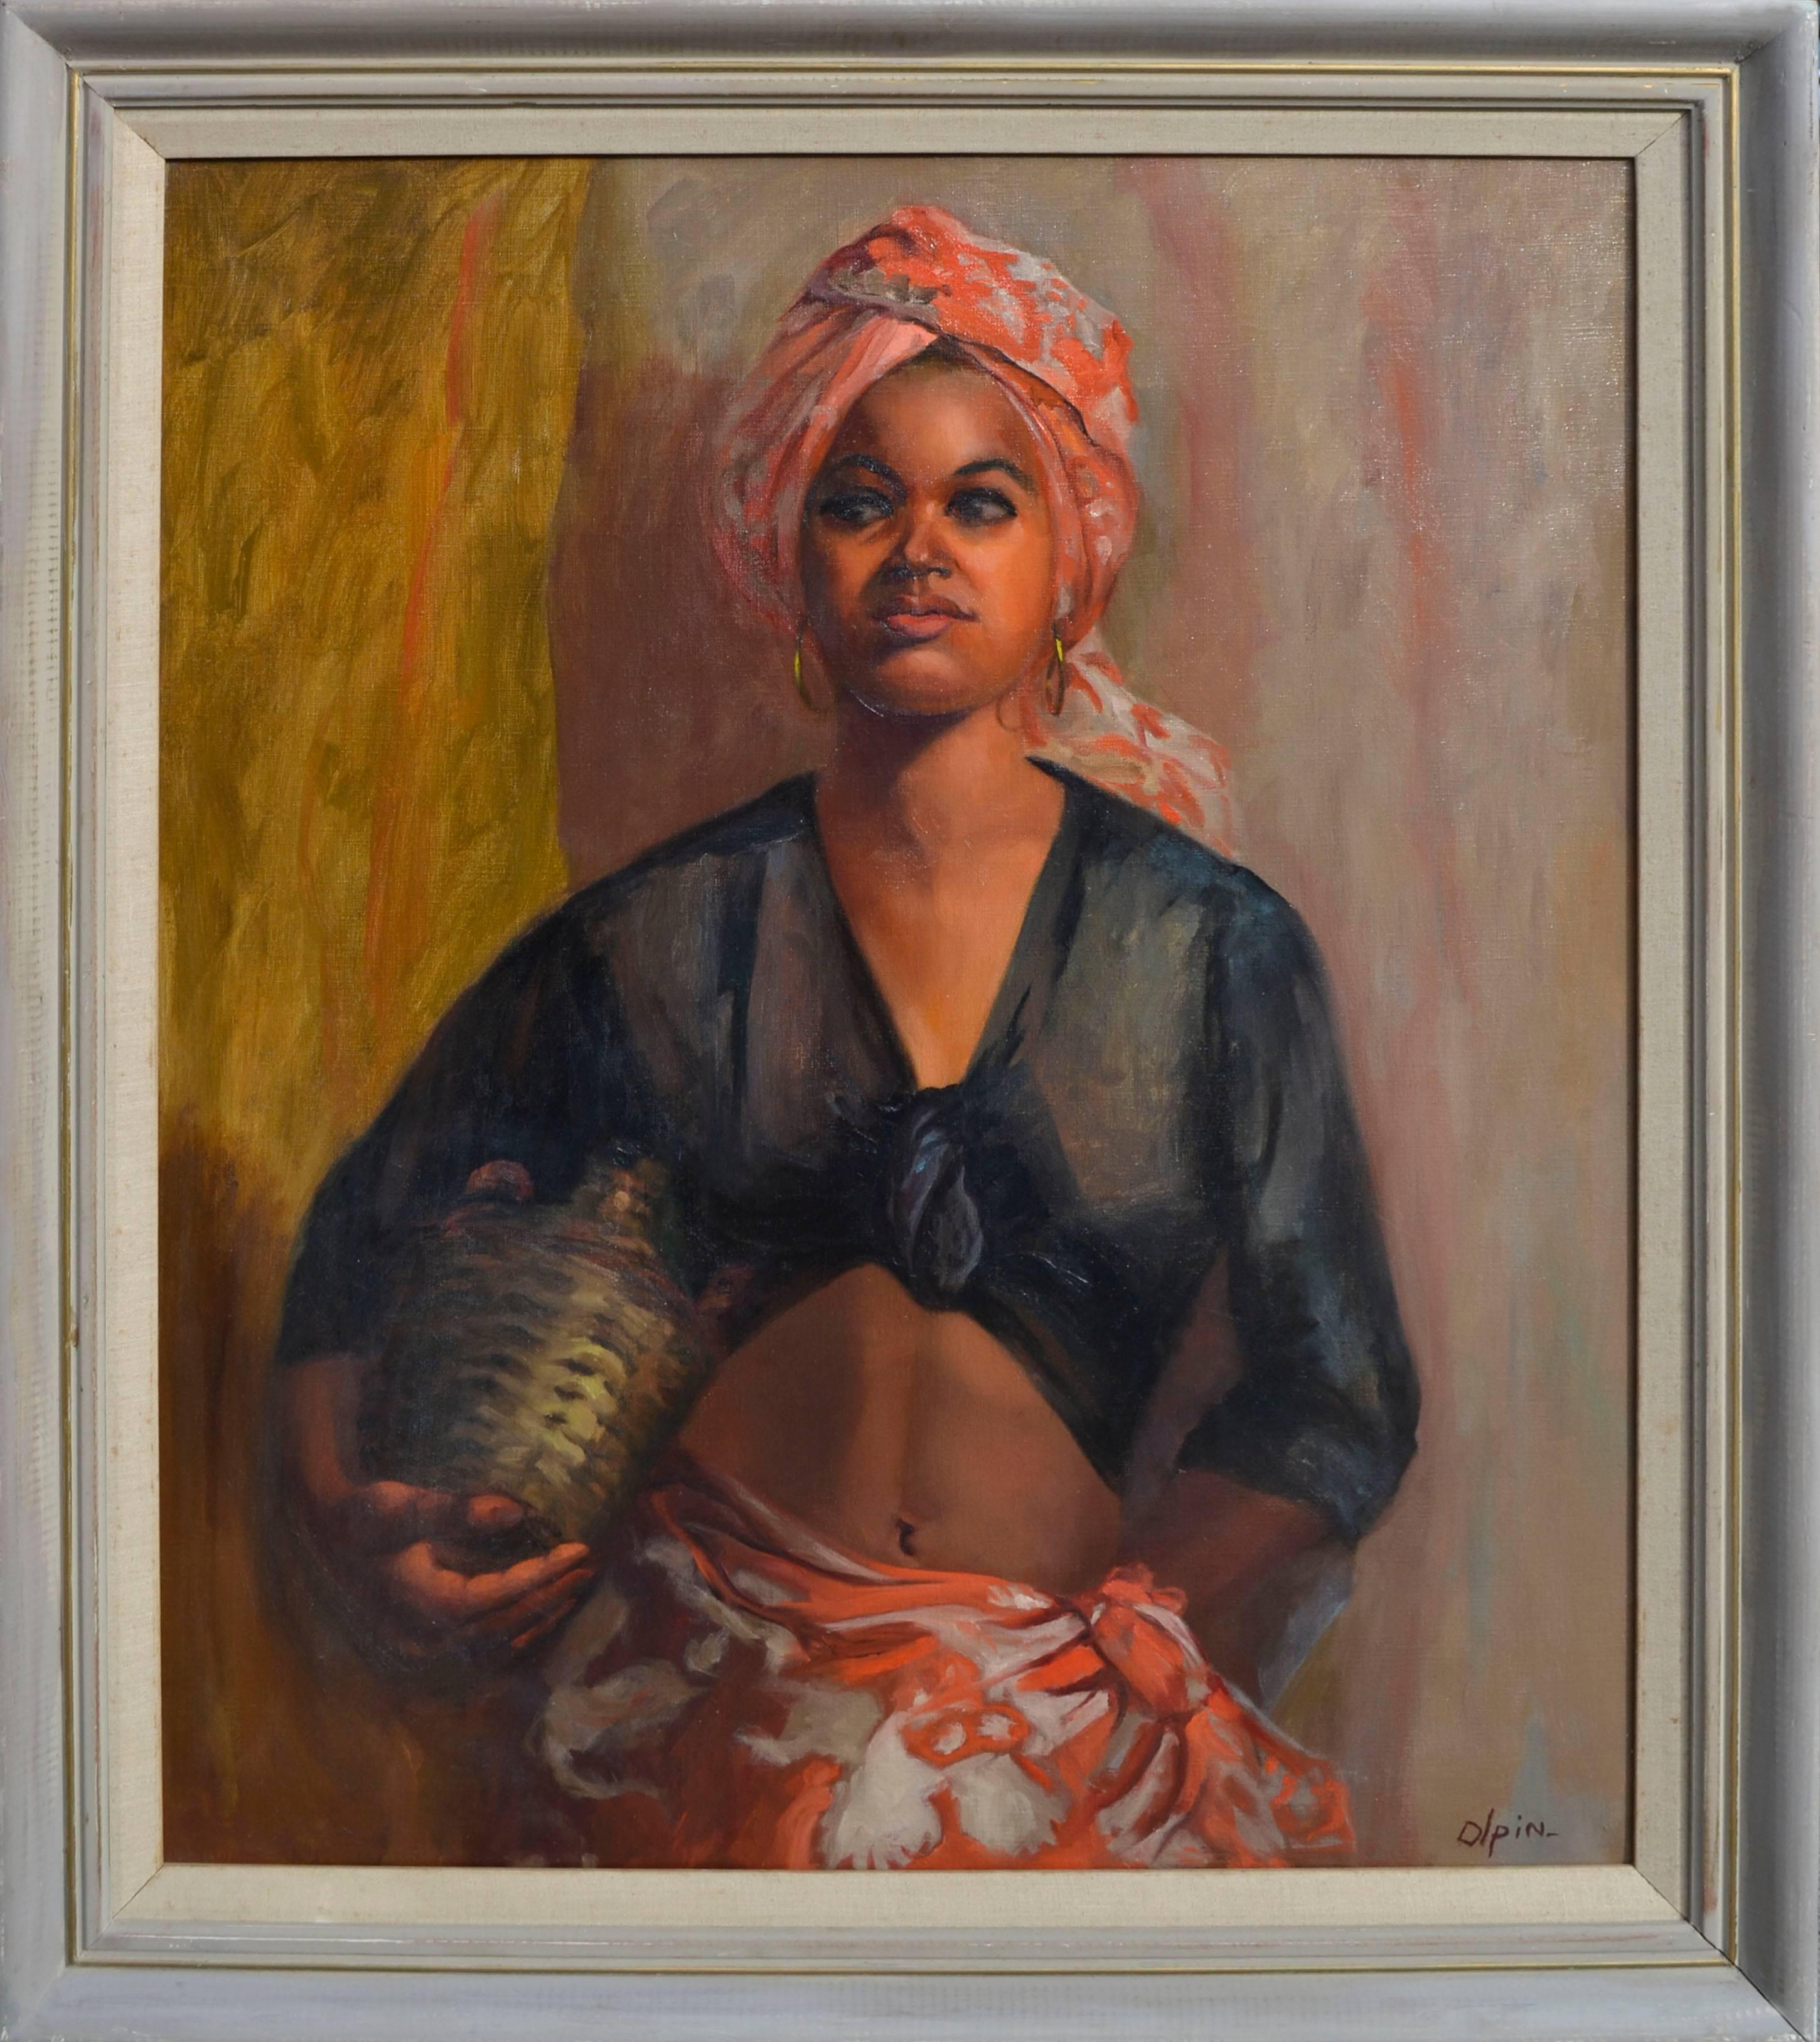 "My Name is Freddie" - Portrait of Black Woman with Headscarf 